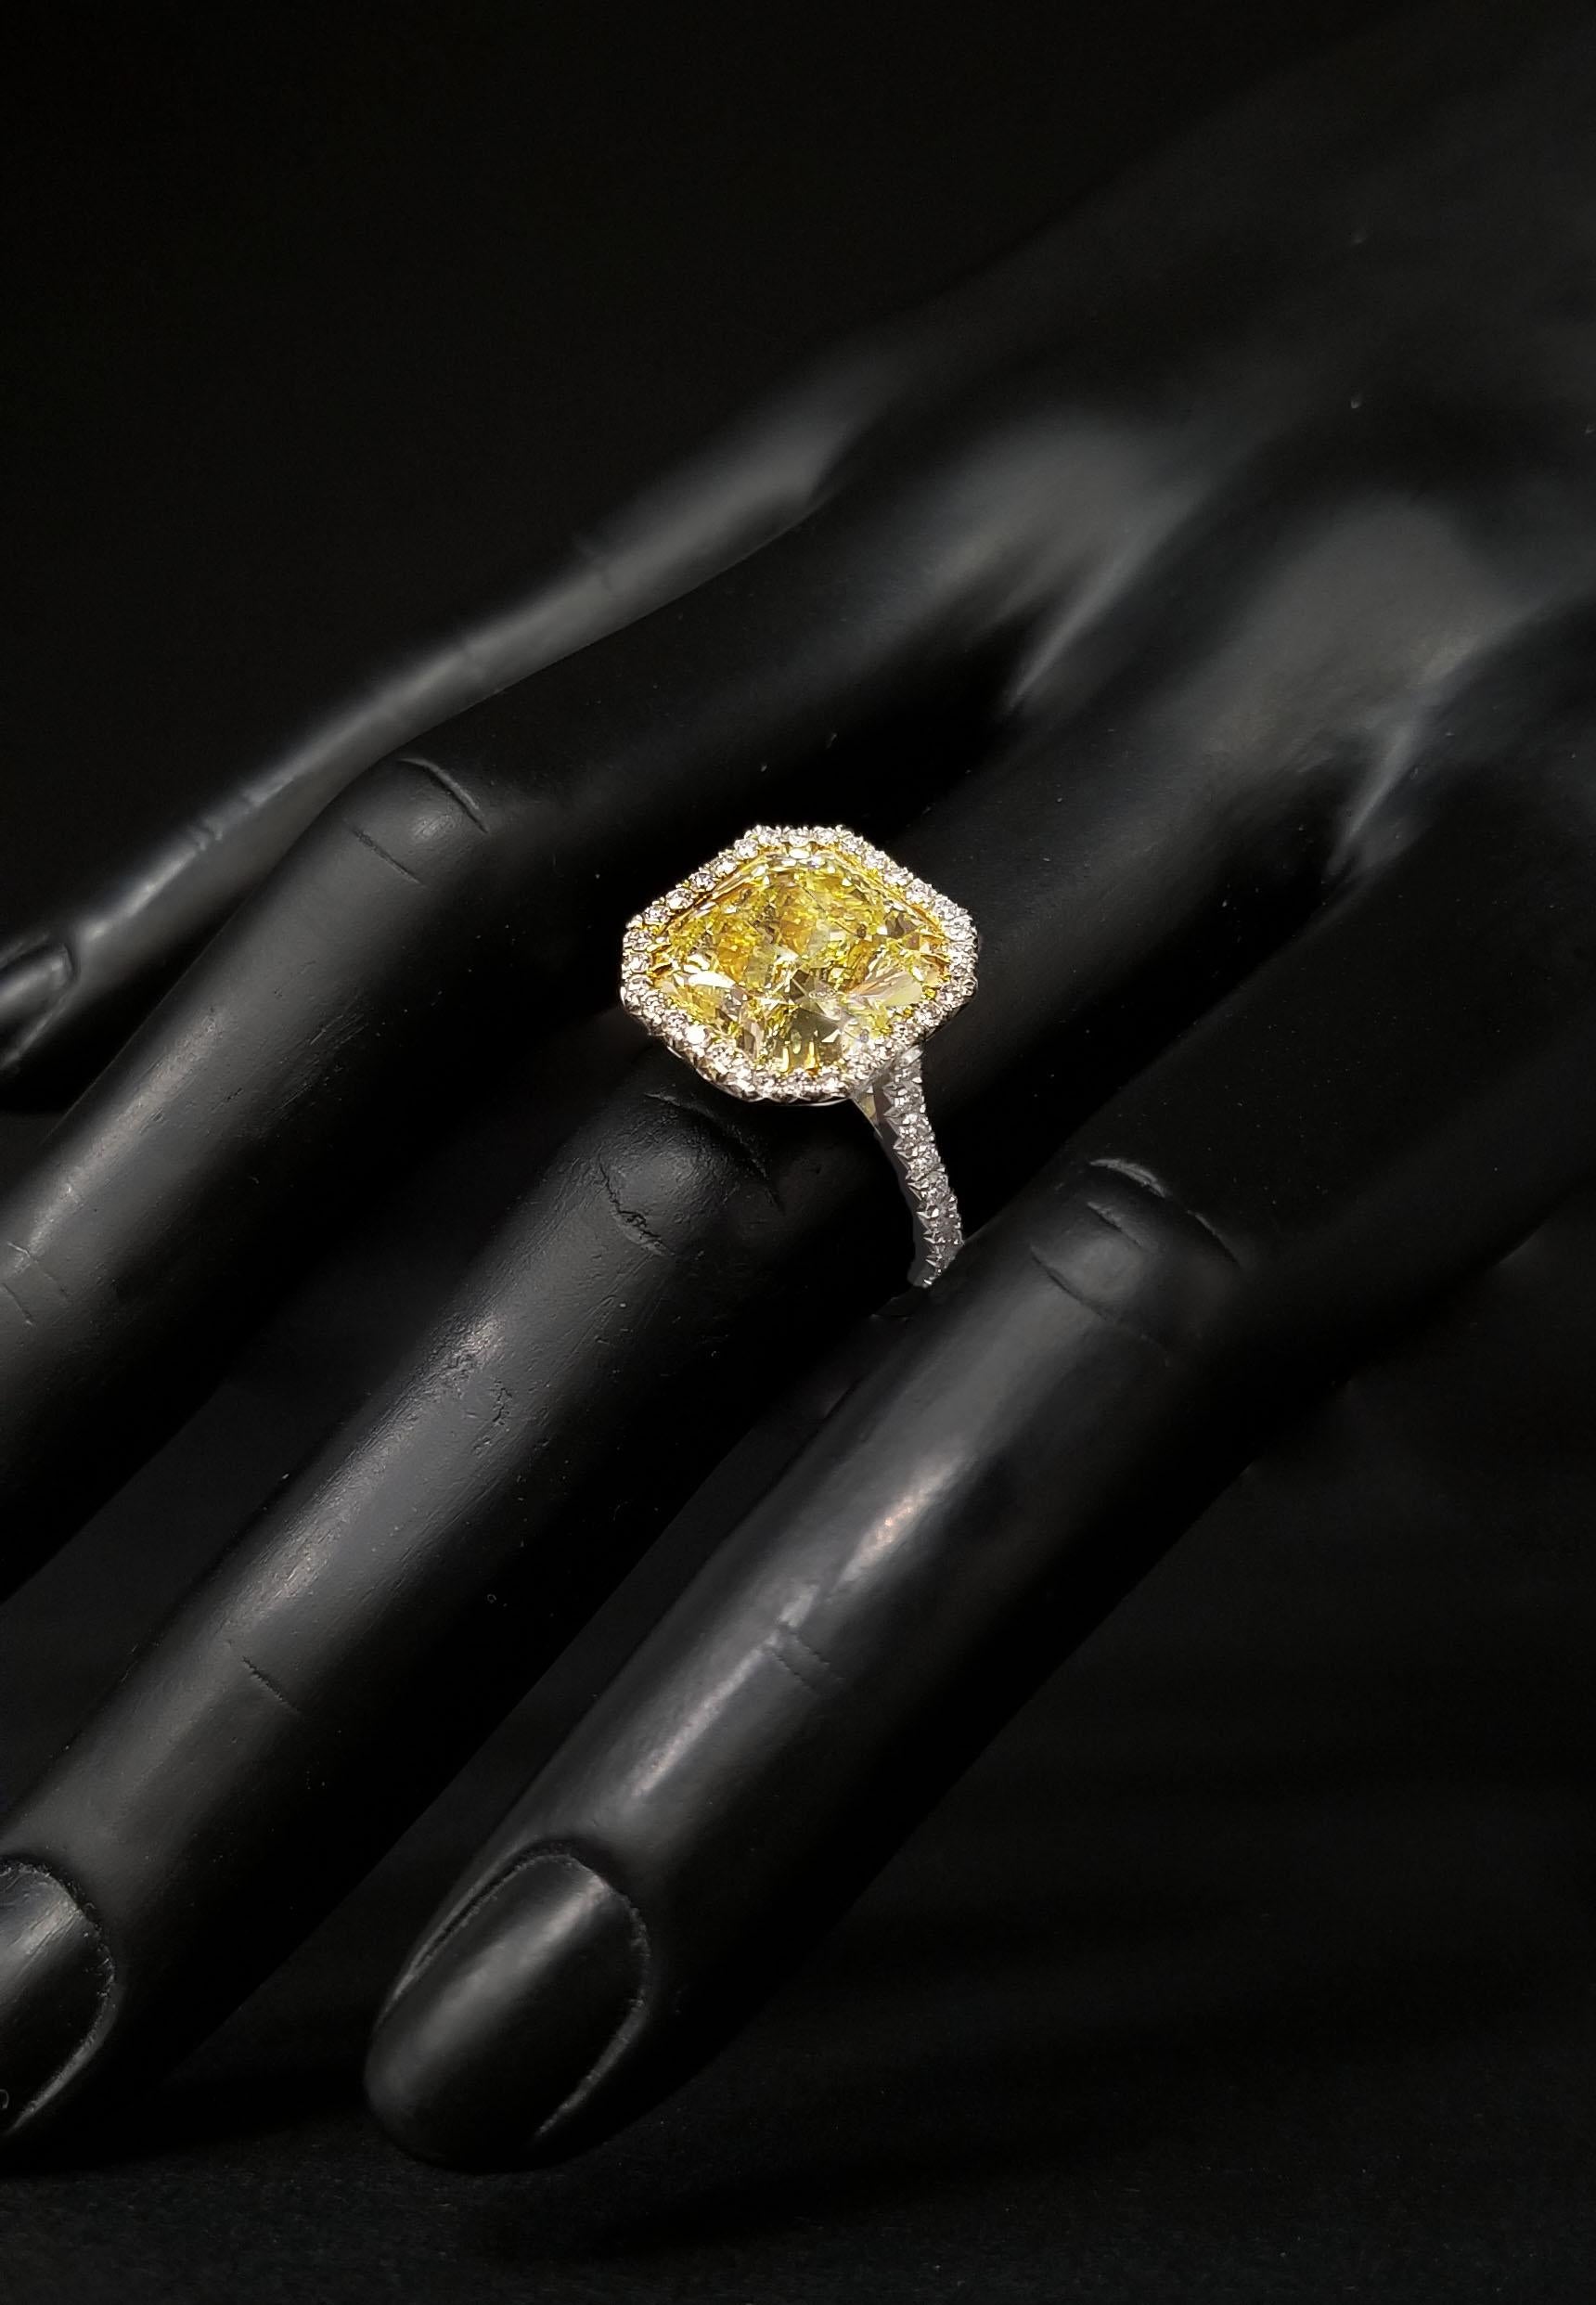 Contemporary Scarselli 7 Carat Fancy Intense Yellow Diamond Ring in Platinum For Sale